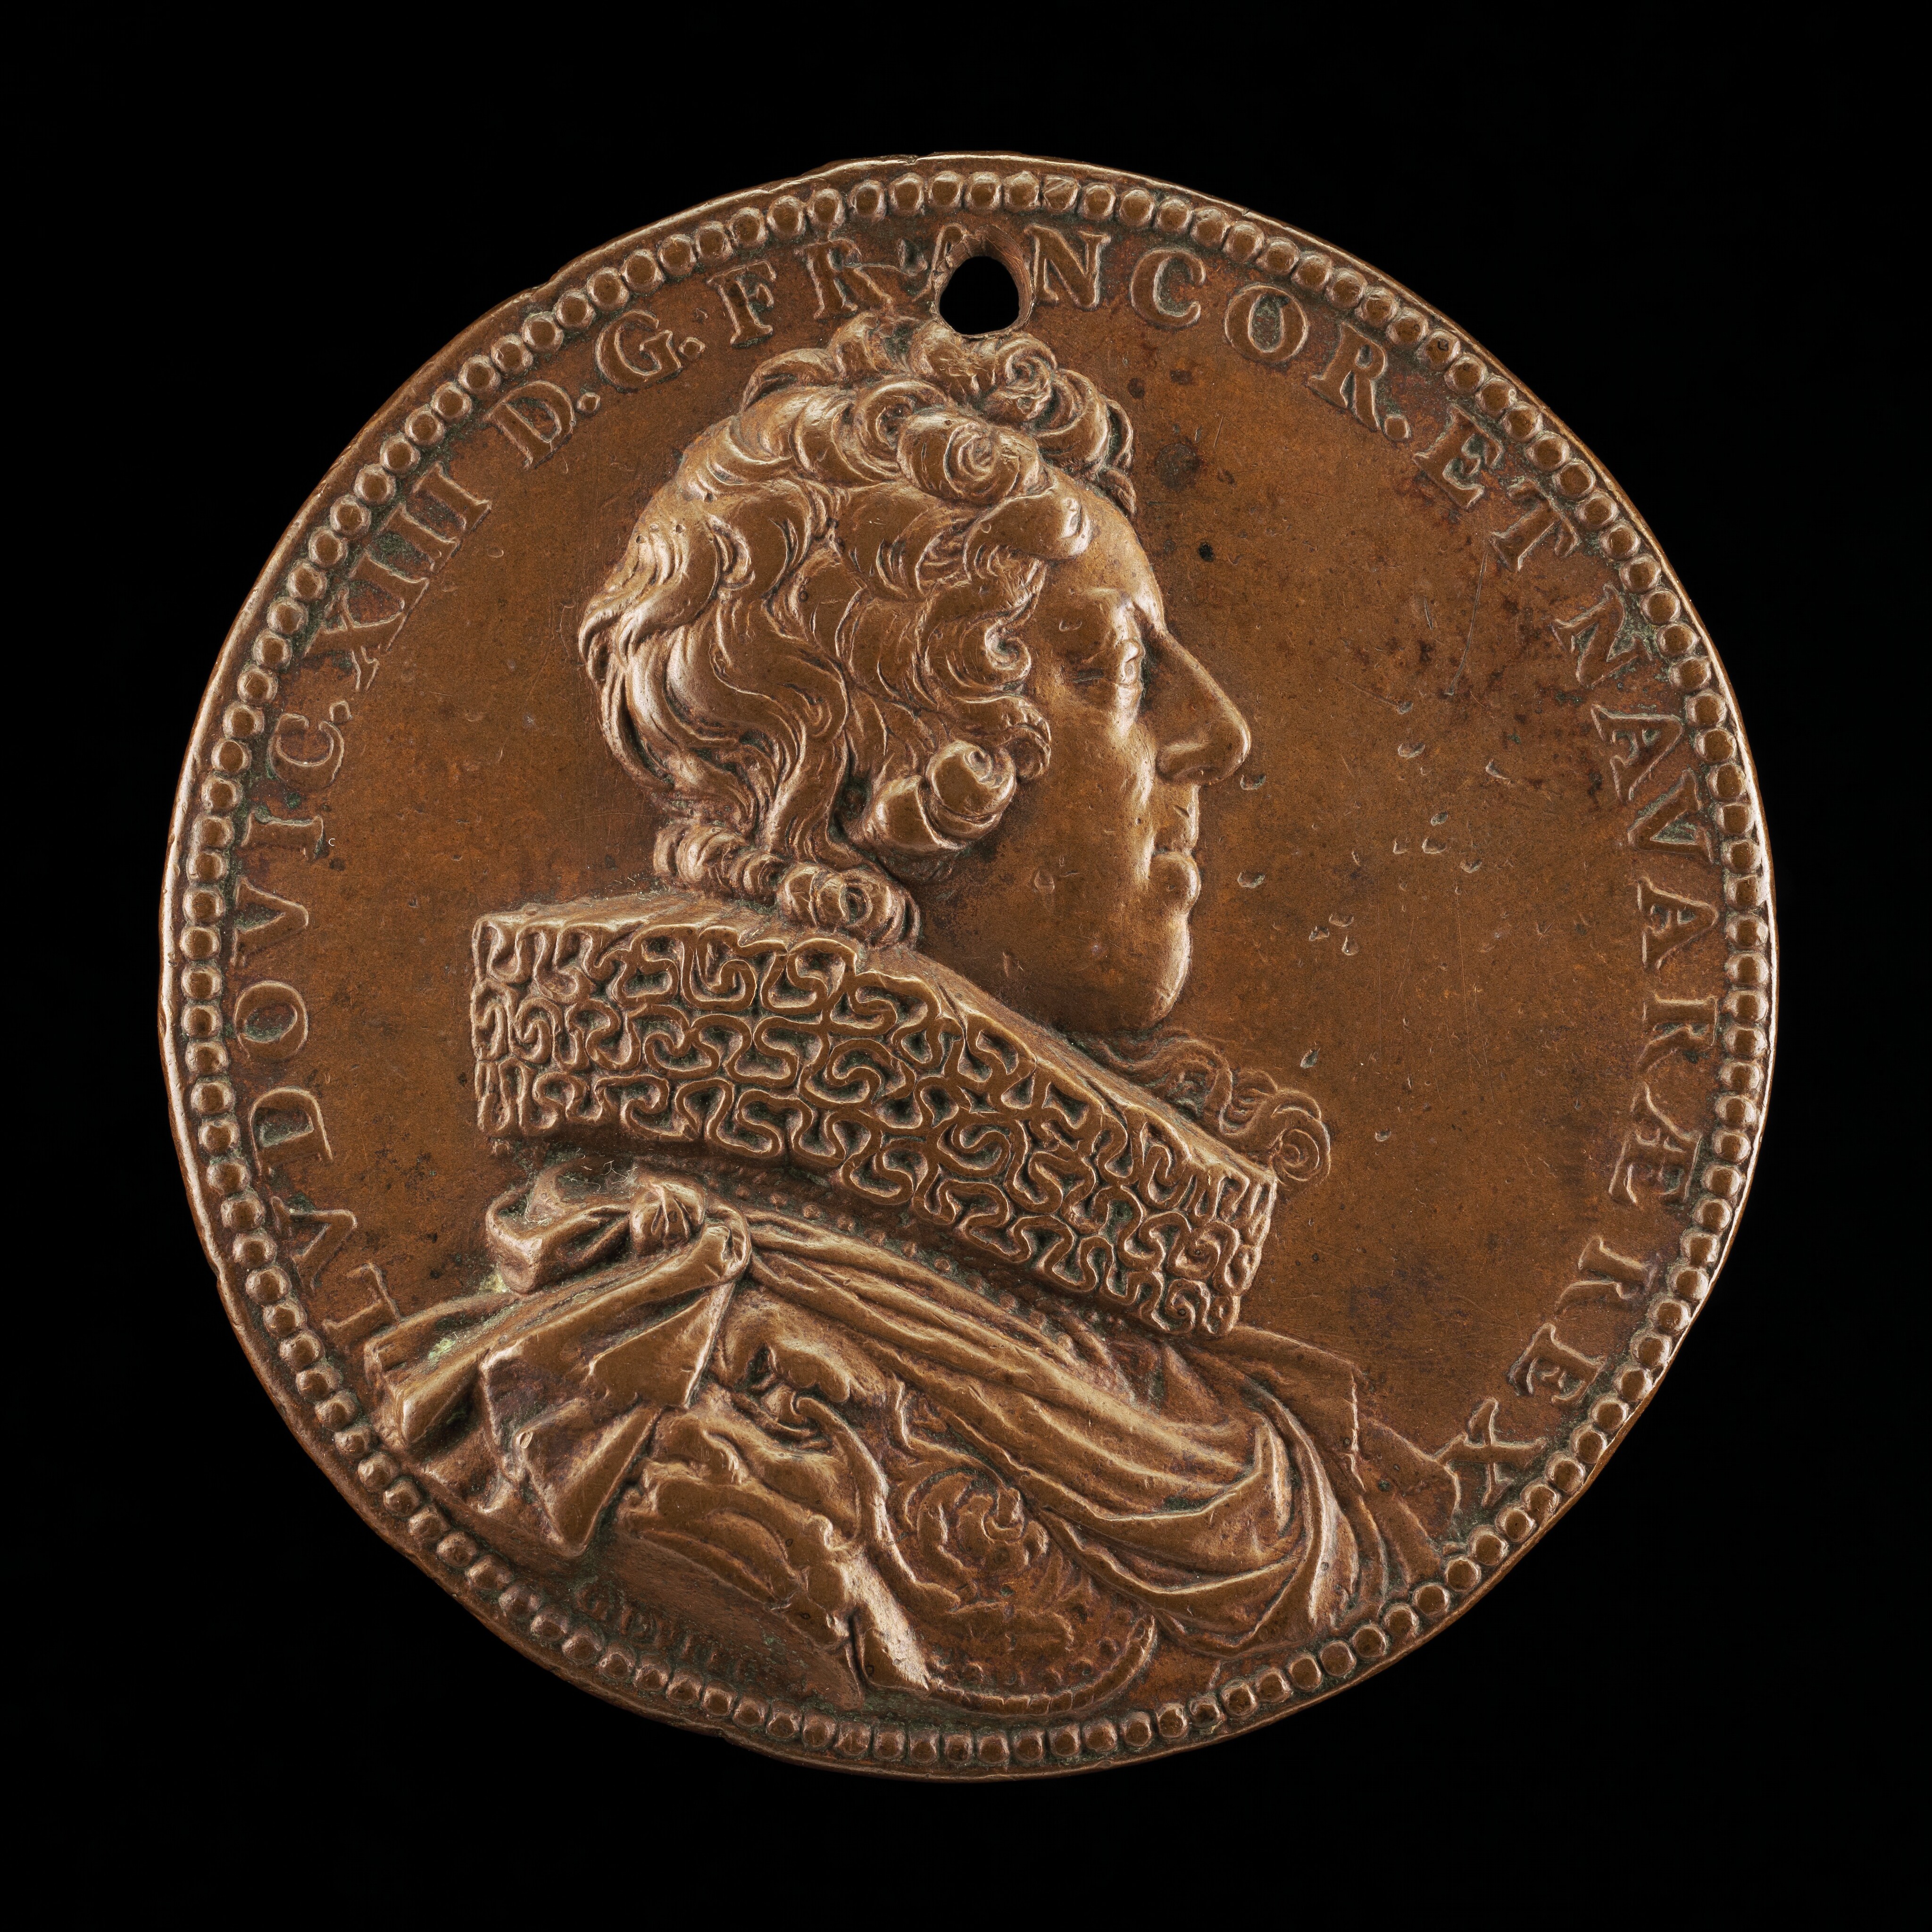 Louis XIII, King of France (1601-1643), with the Sash and Badge of